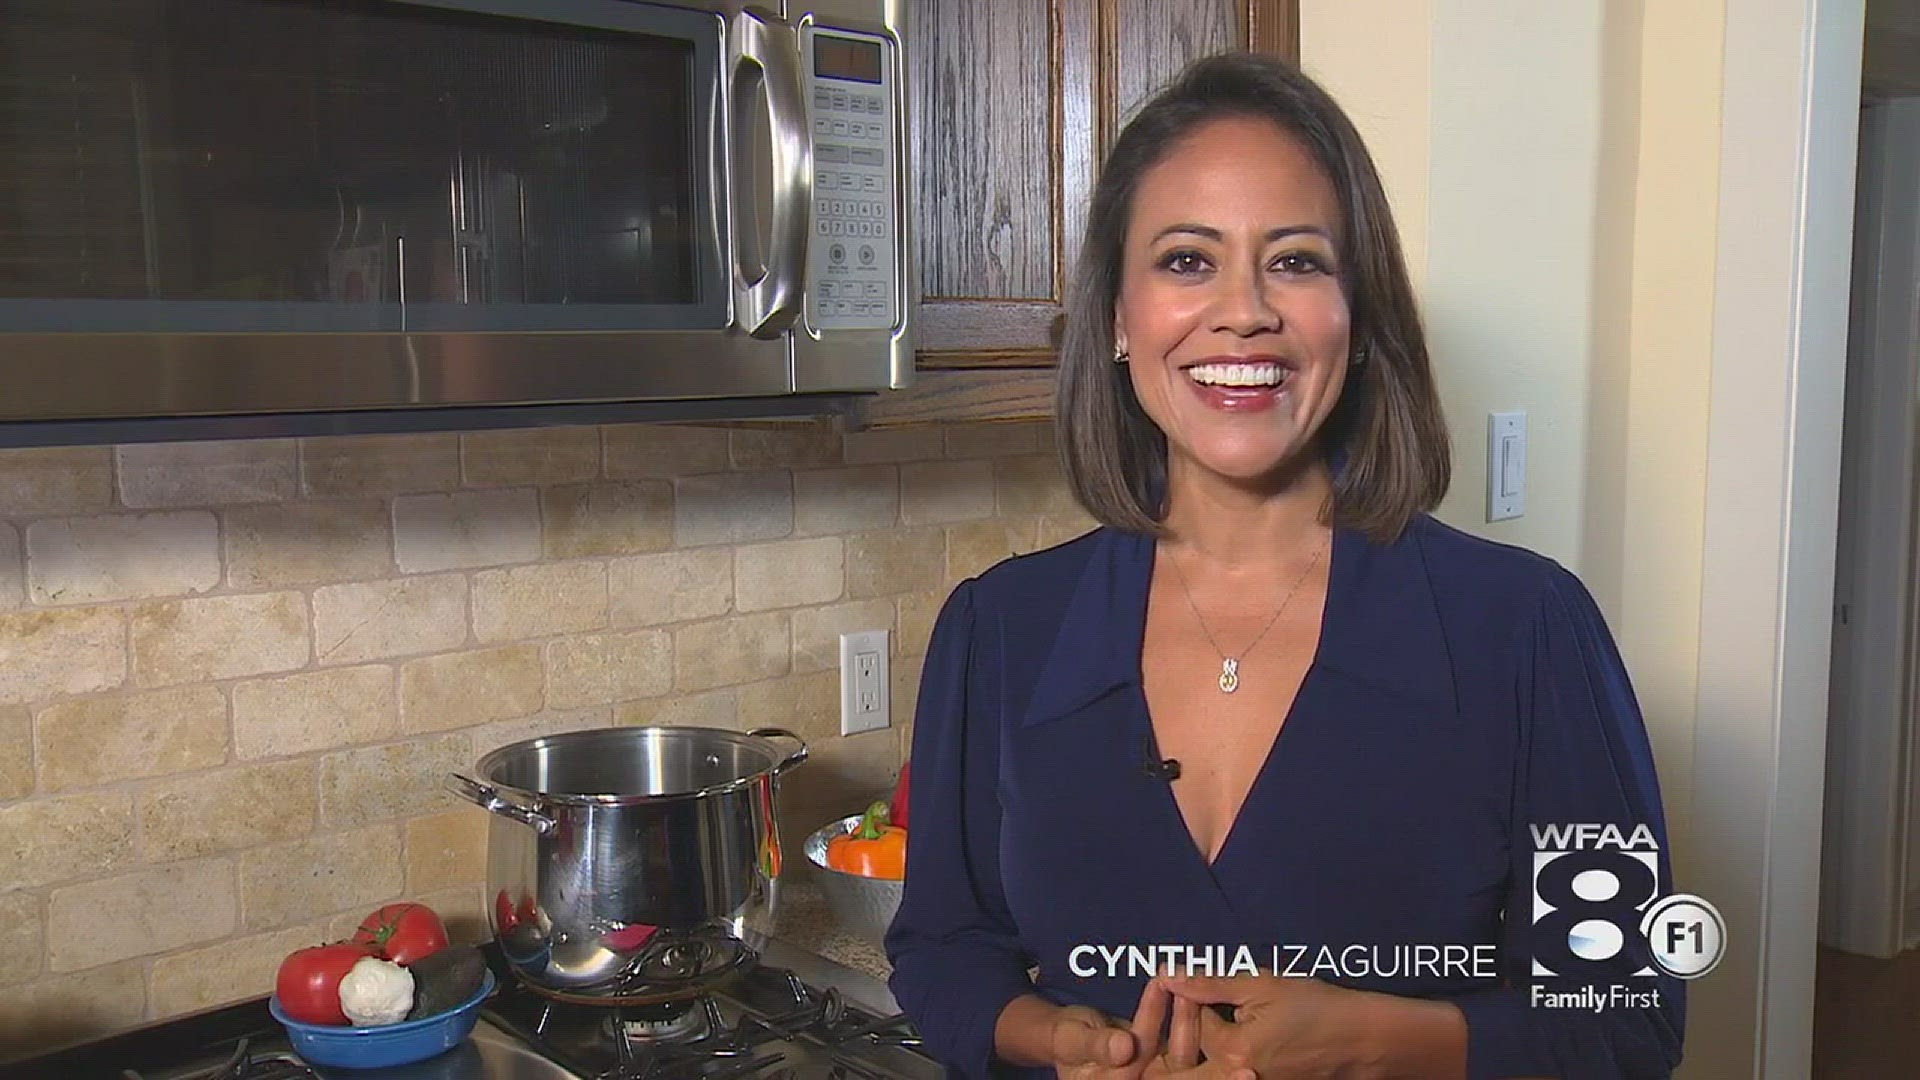 News 8's Cynthia Izaguirre shares a family tradition of making soup that she hopes to pass on to her own children.